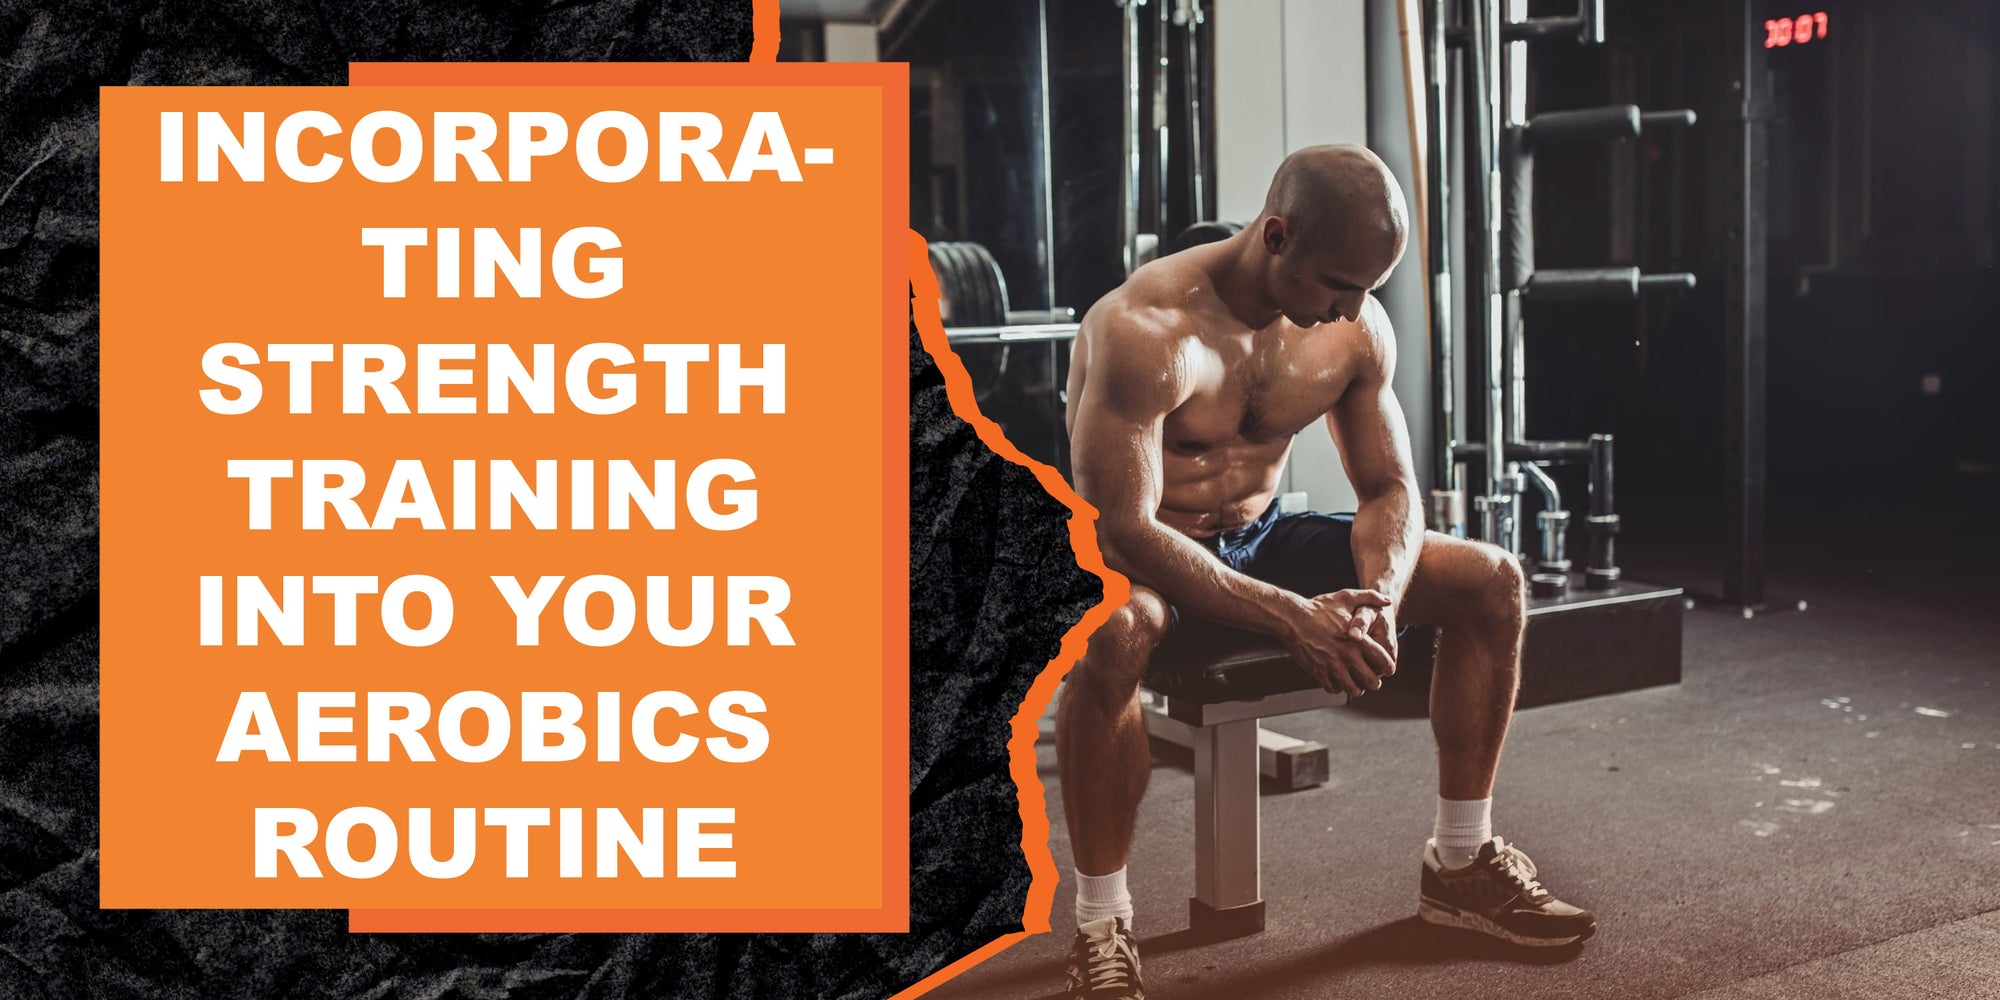 Incorporating Strength Training into Your Aerobics Routine